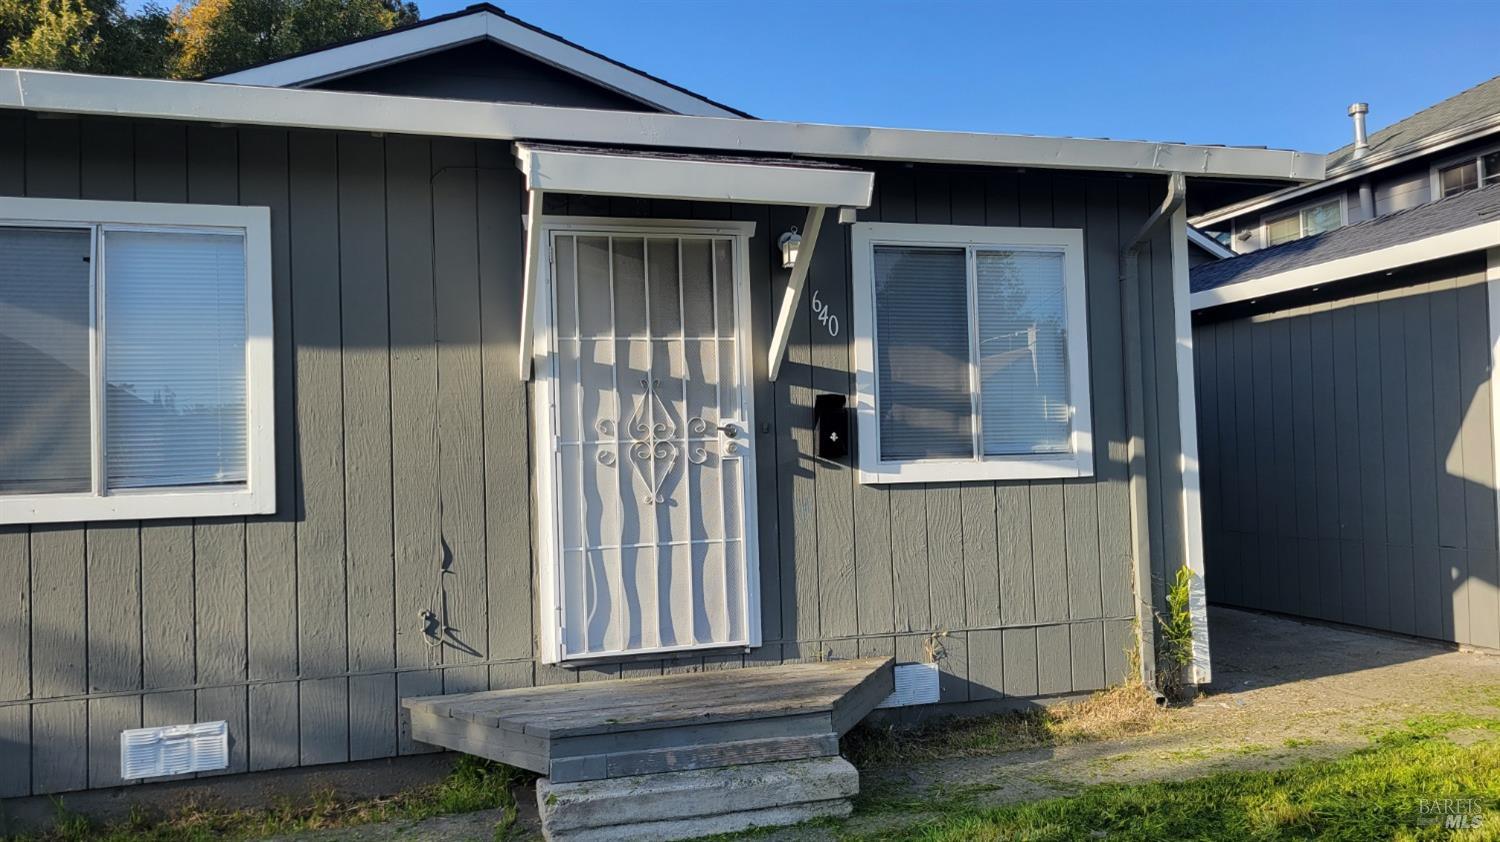 Photo of 640642 Indiana St in Vallejo, CA